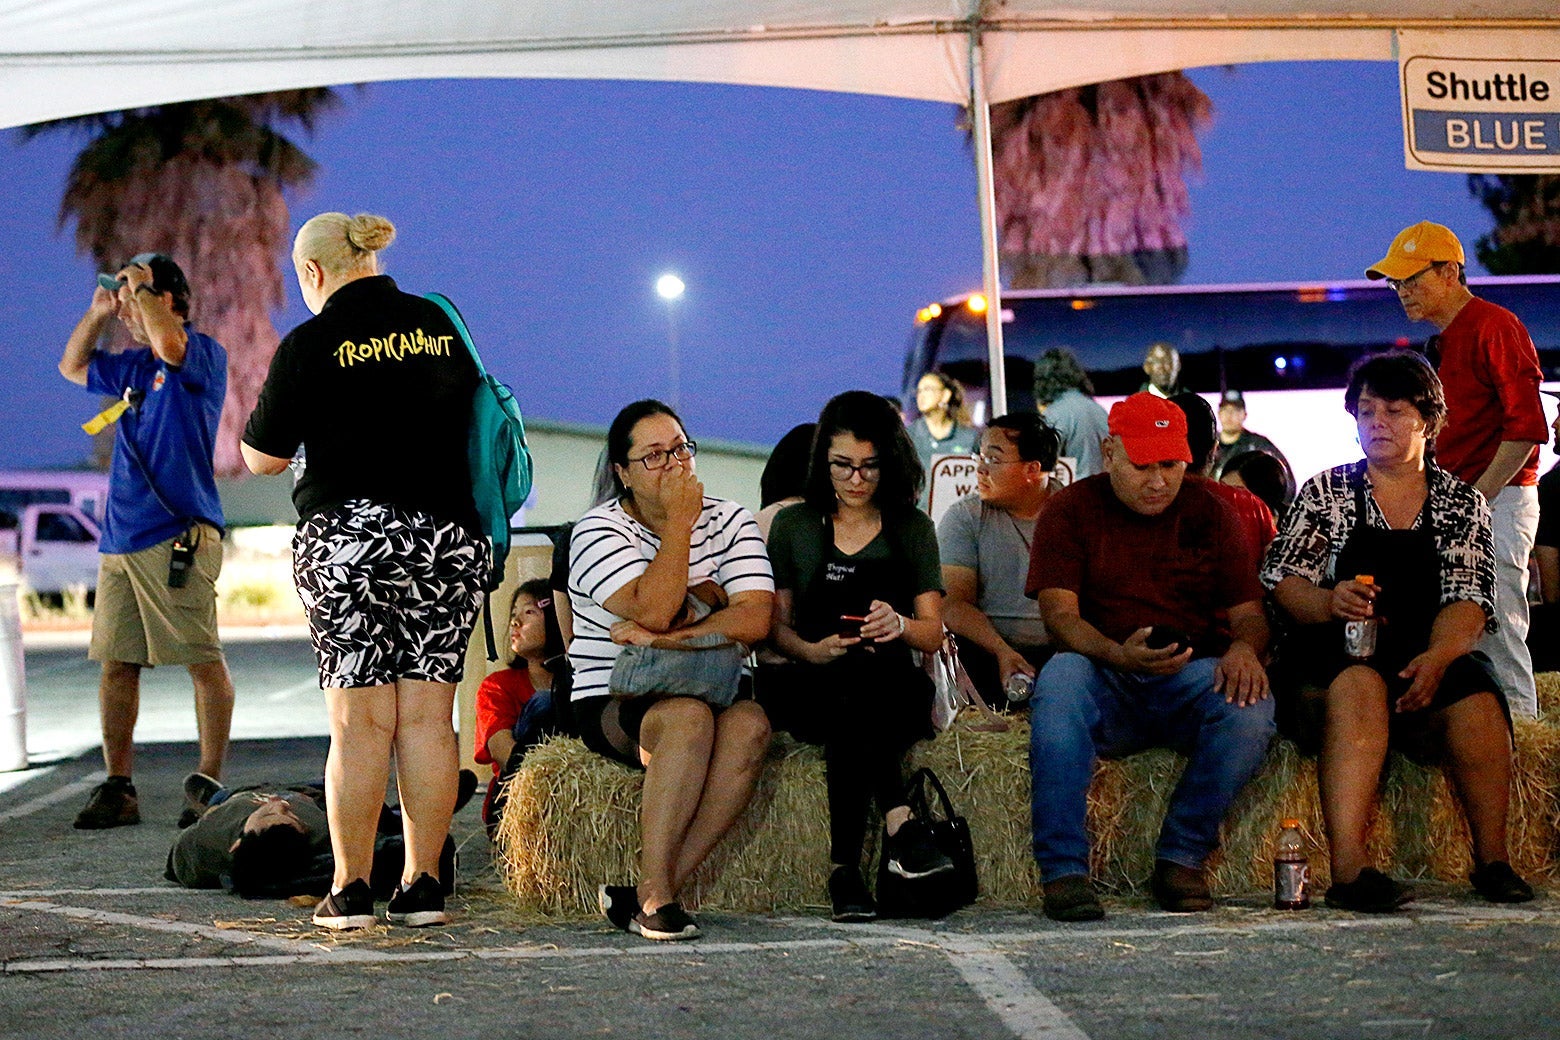 Festival attendees wait for relatives at a reunification center at Gavilan College following a shooting at the Gilroy Garlic Festival on Sunday.